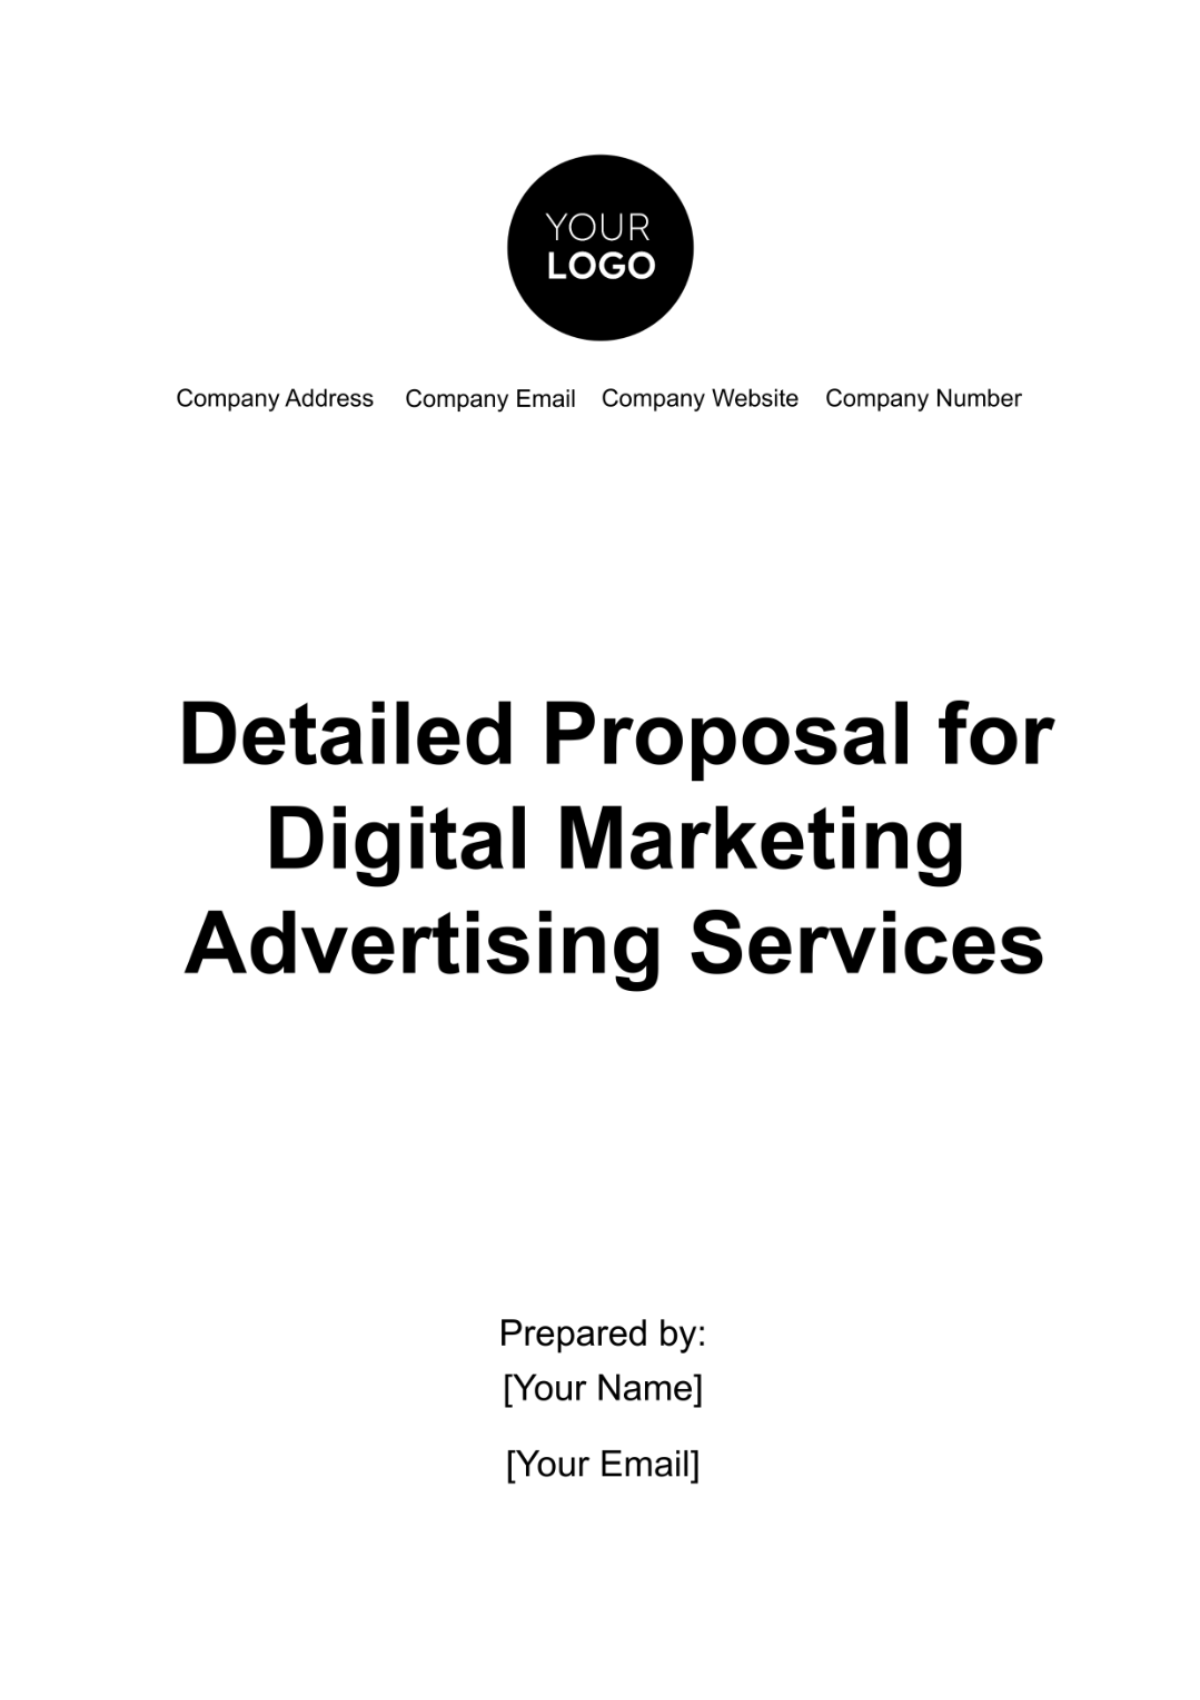 Detailed Proposal for Digital Marketing Advertising Services Template 